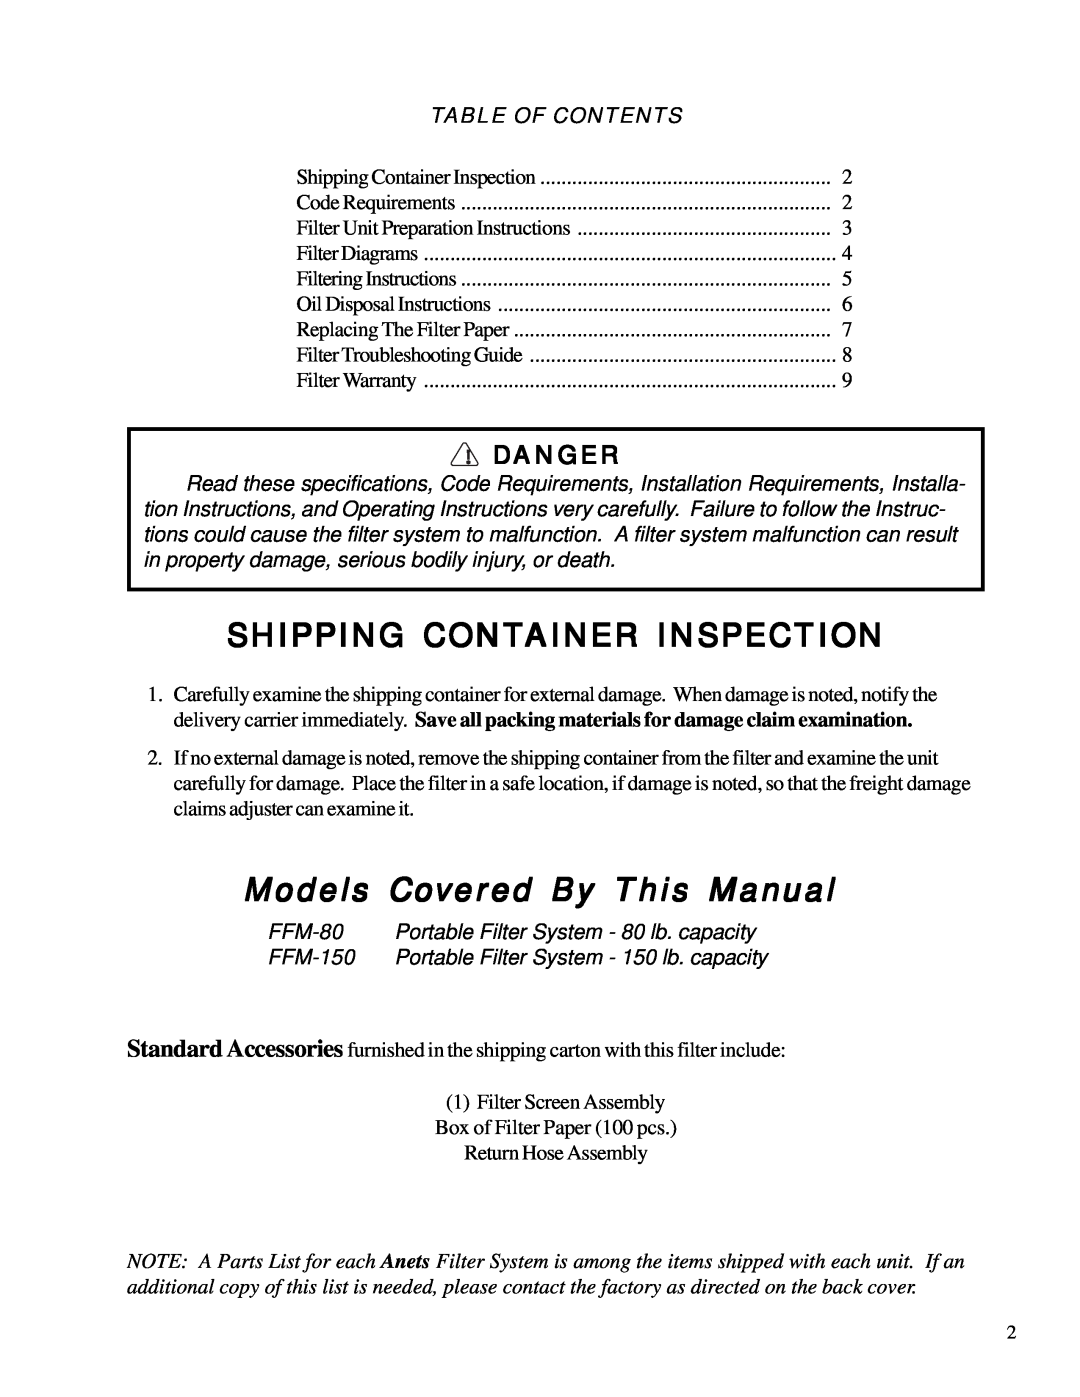 Anetsberger Brothers FFM-80 Models Covered By This Manual, Danger, Table Of Contents, Shipping Container Inspection 